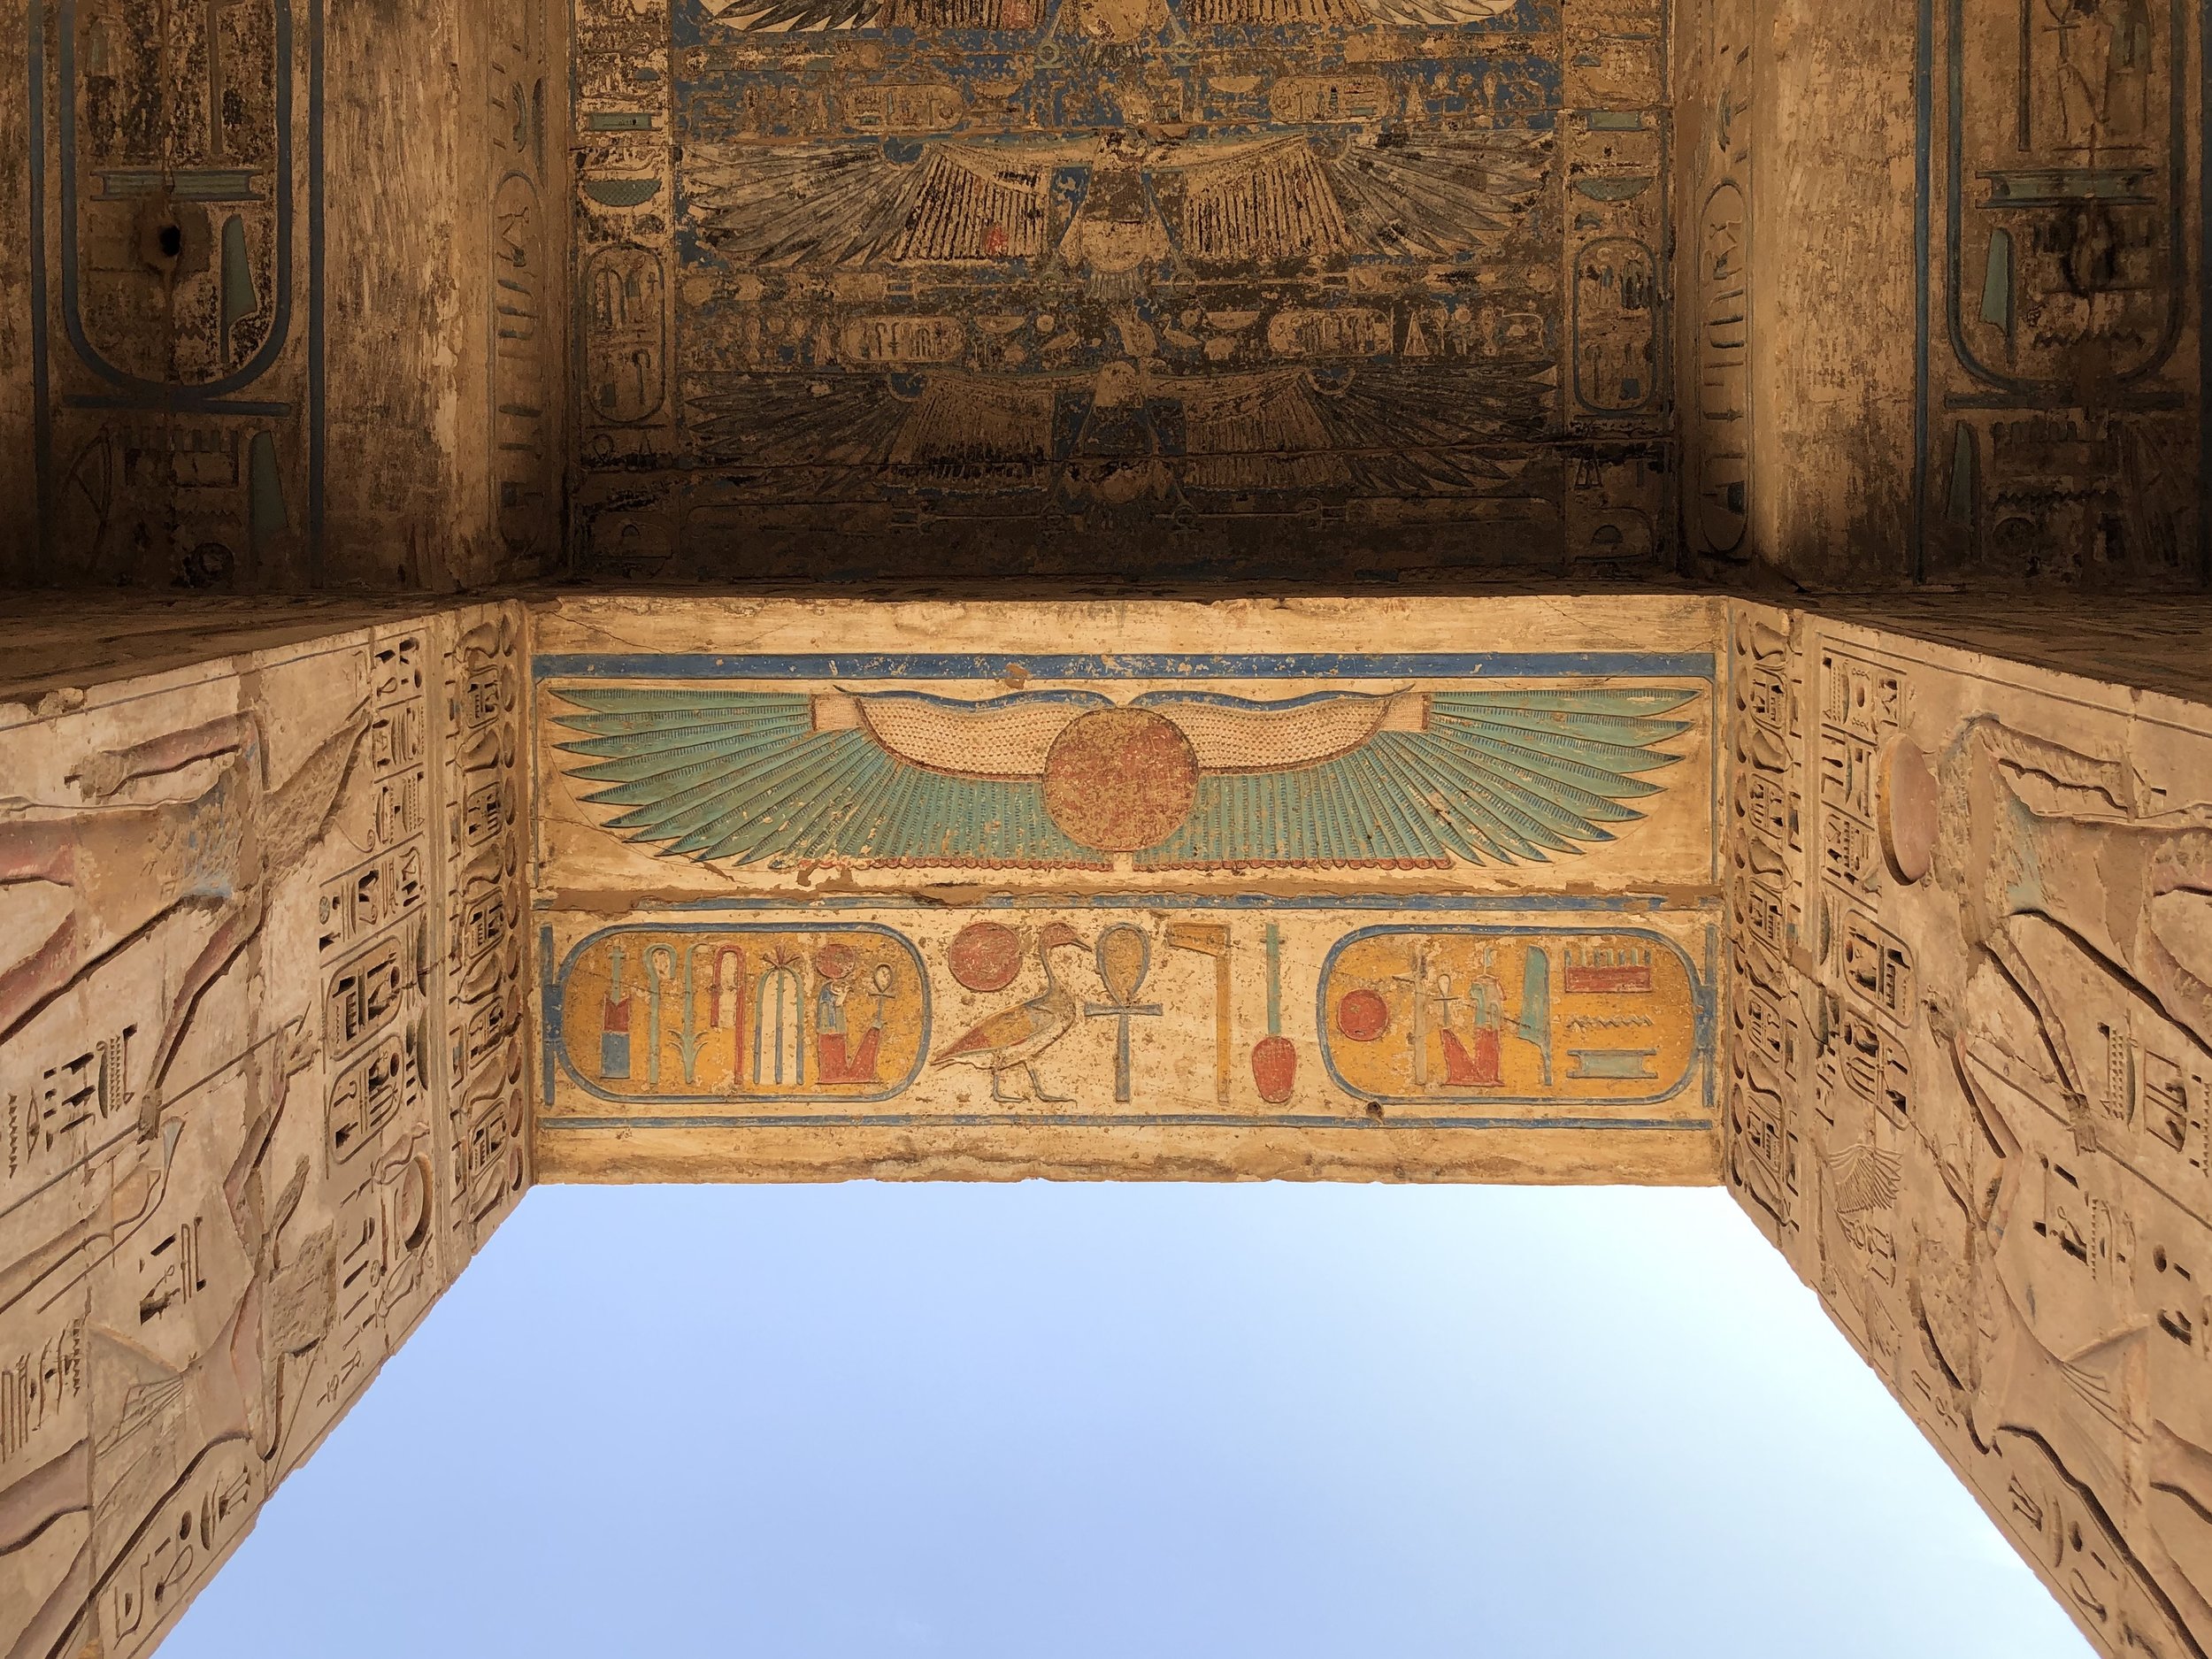 The underside of this gateway shows the winged sun amongst other paintings